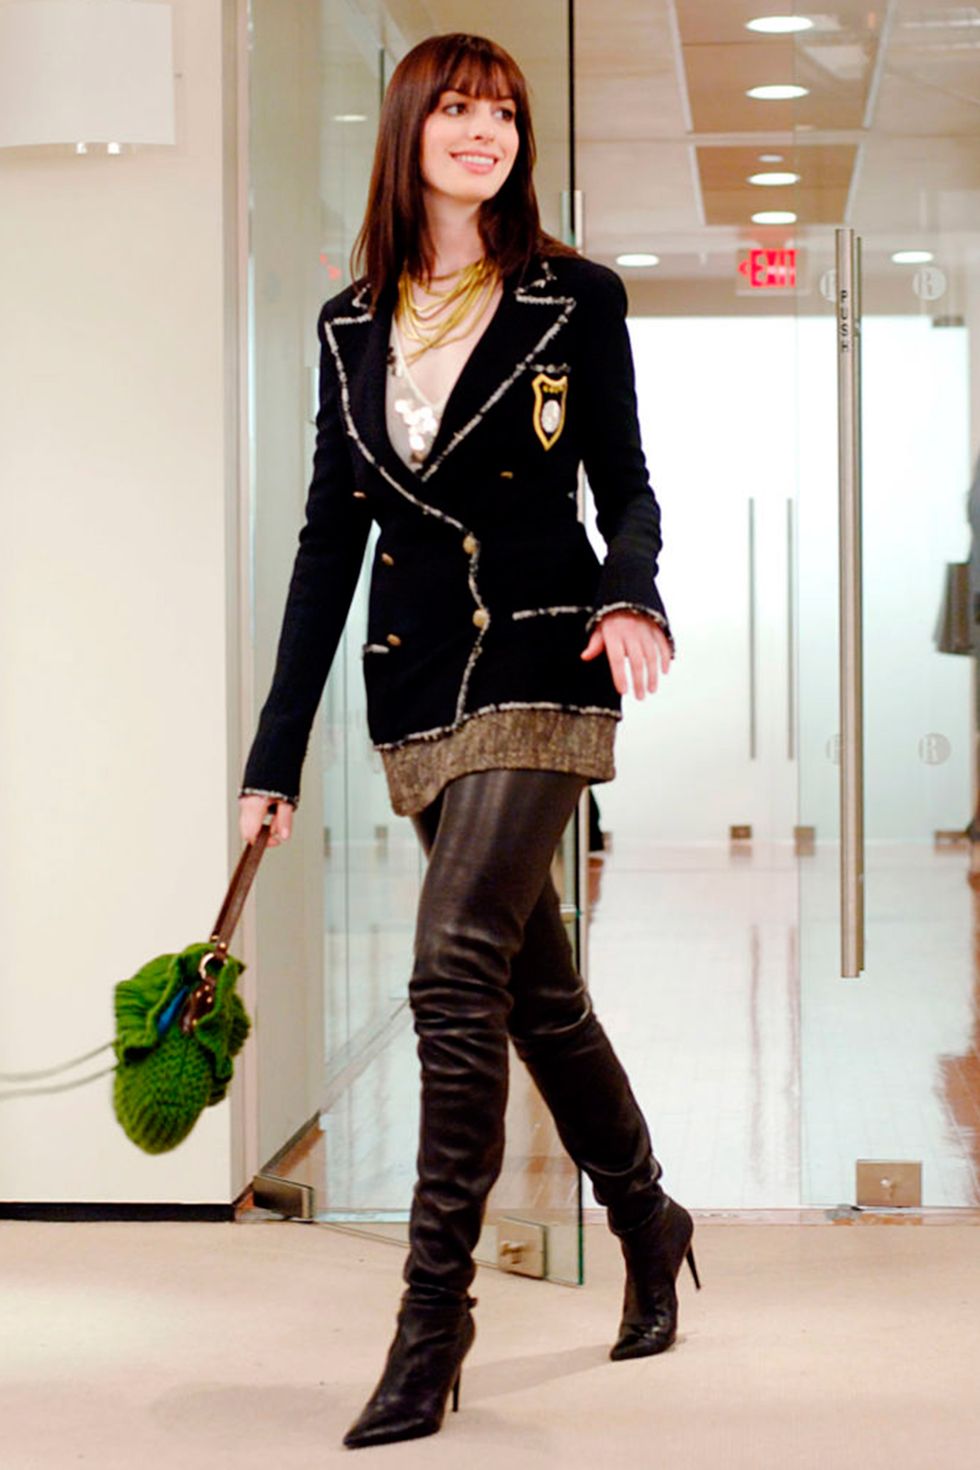 A Devil Wears Prada musical is coming next year